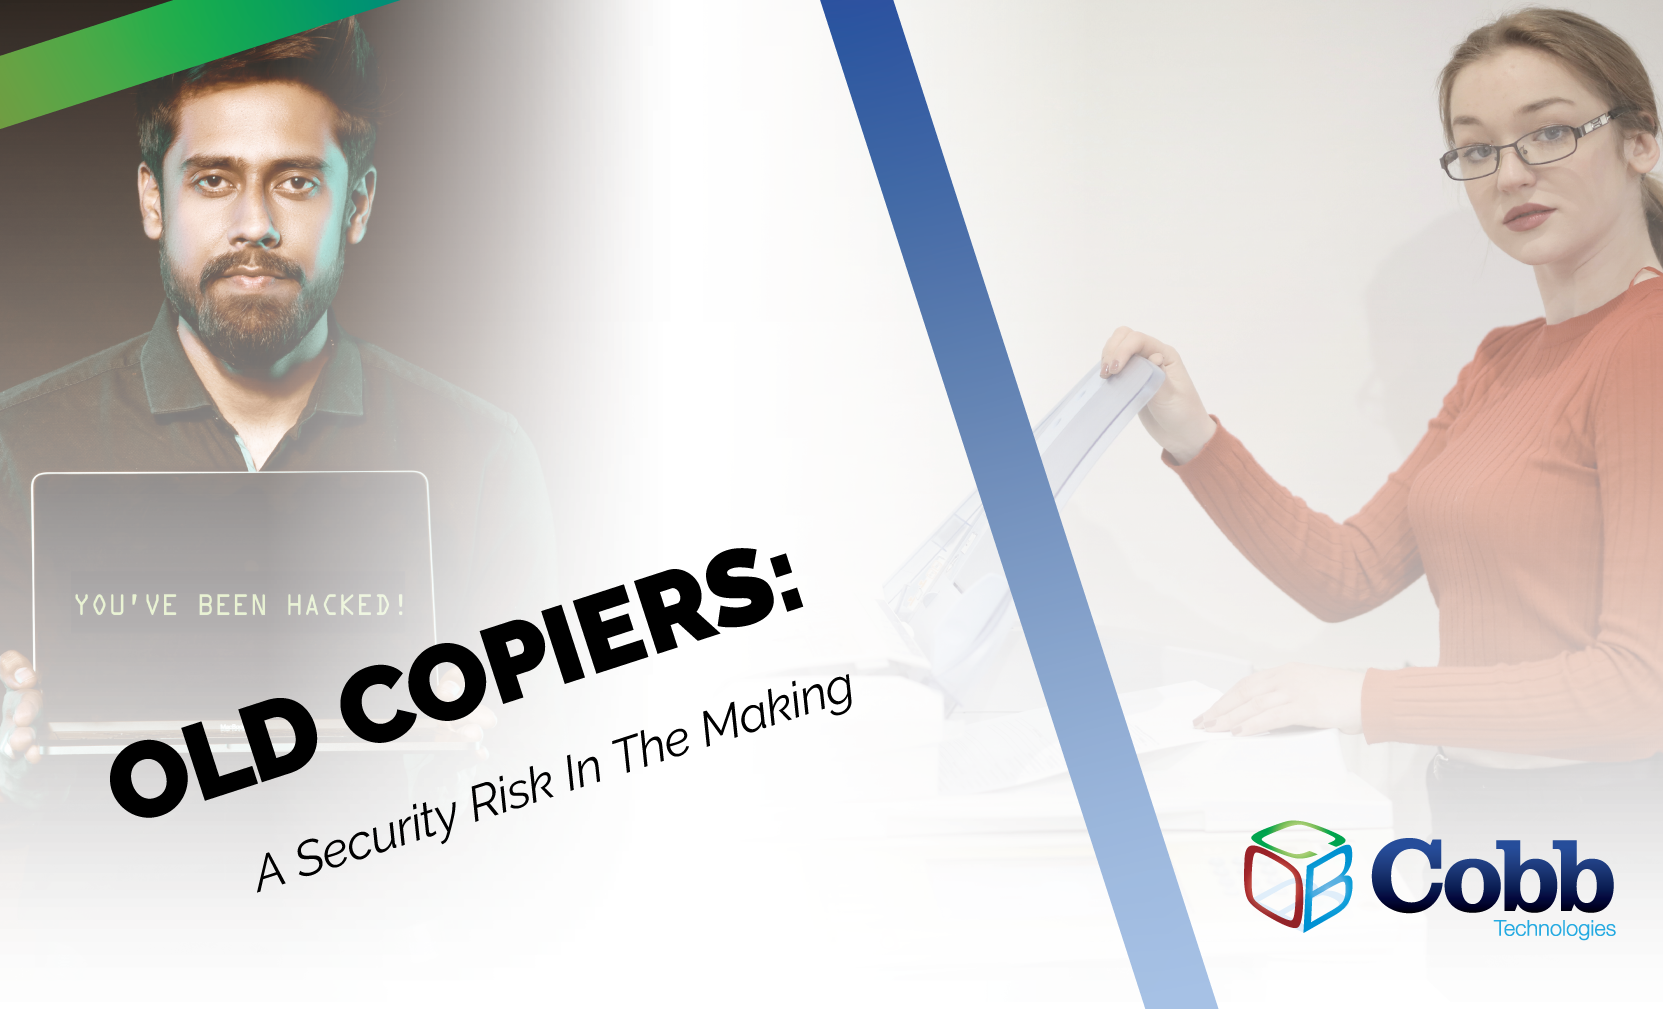 Old Copiers - A Security Risk in the Making